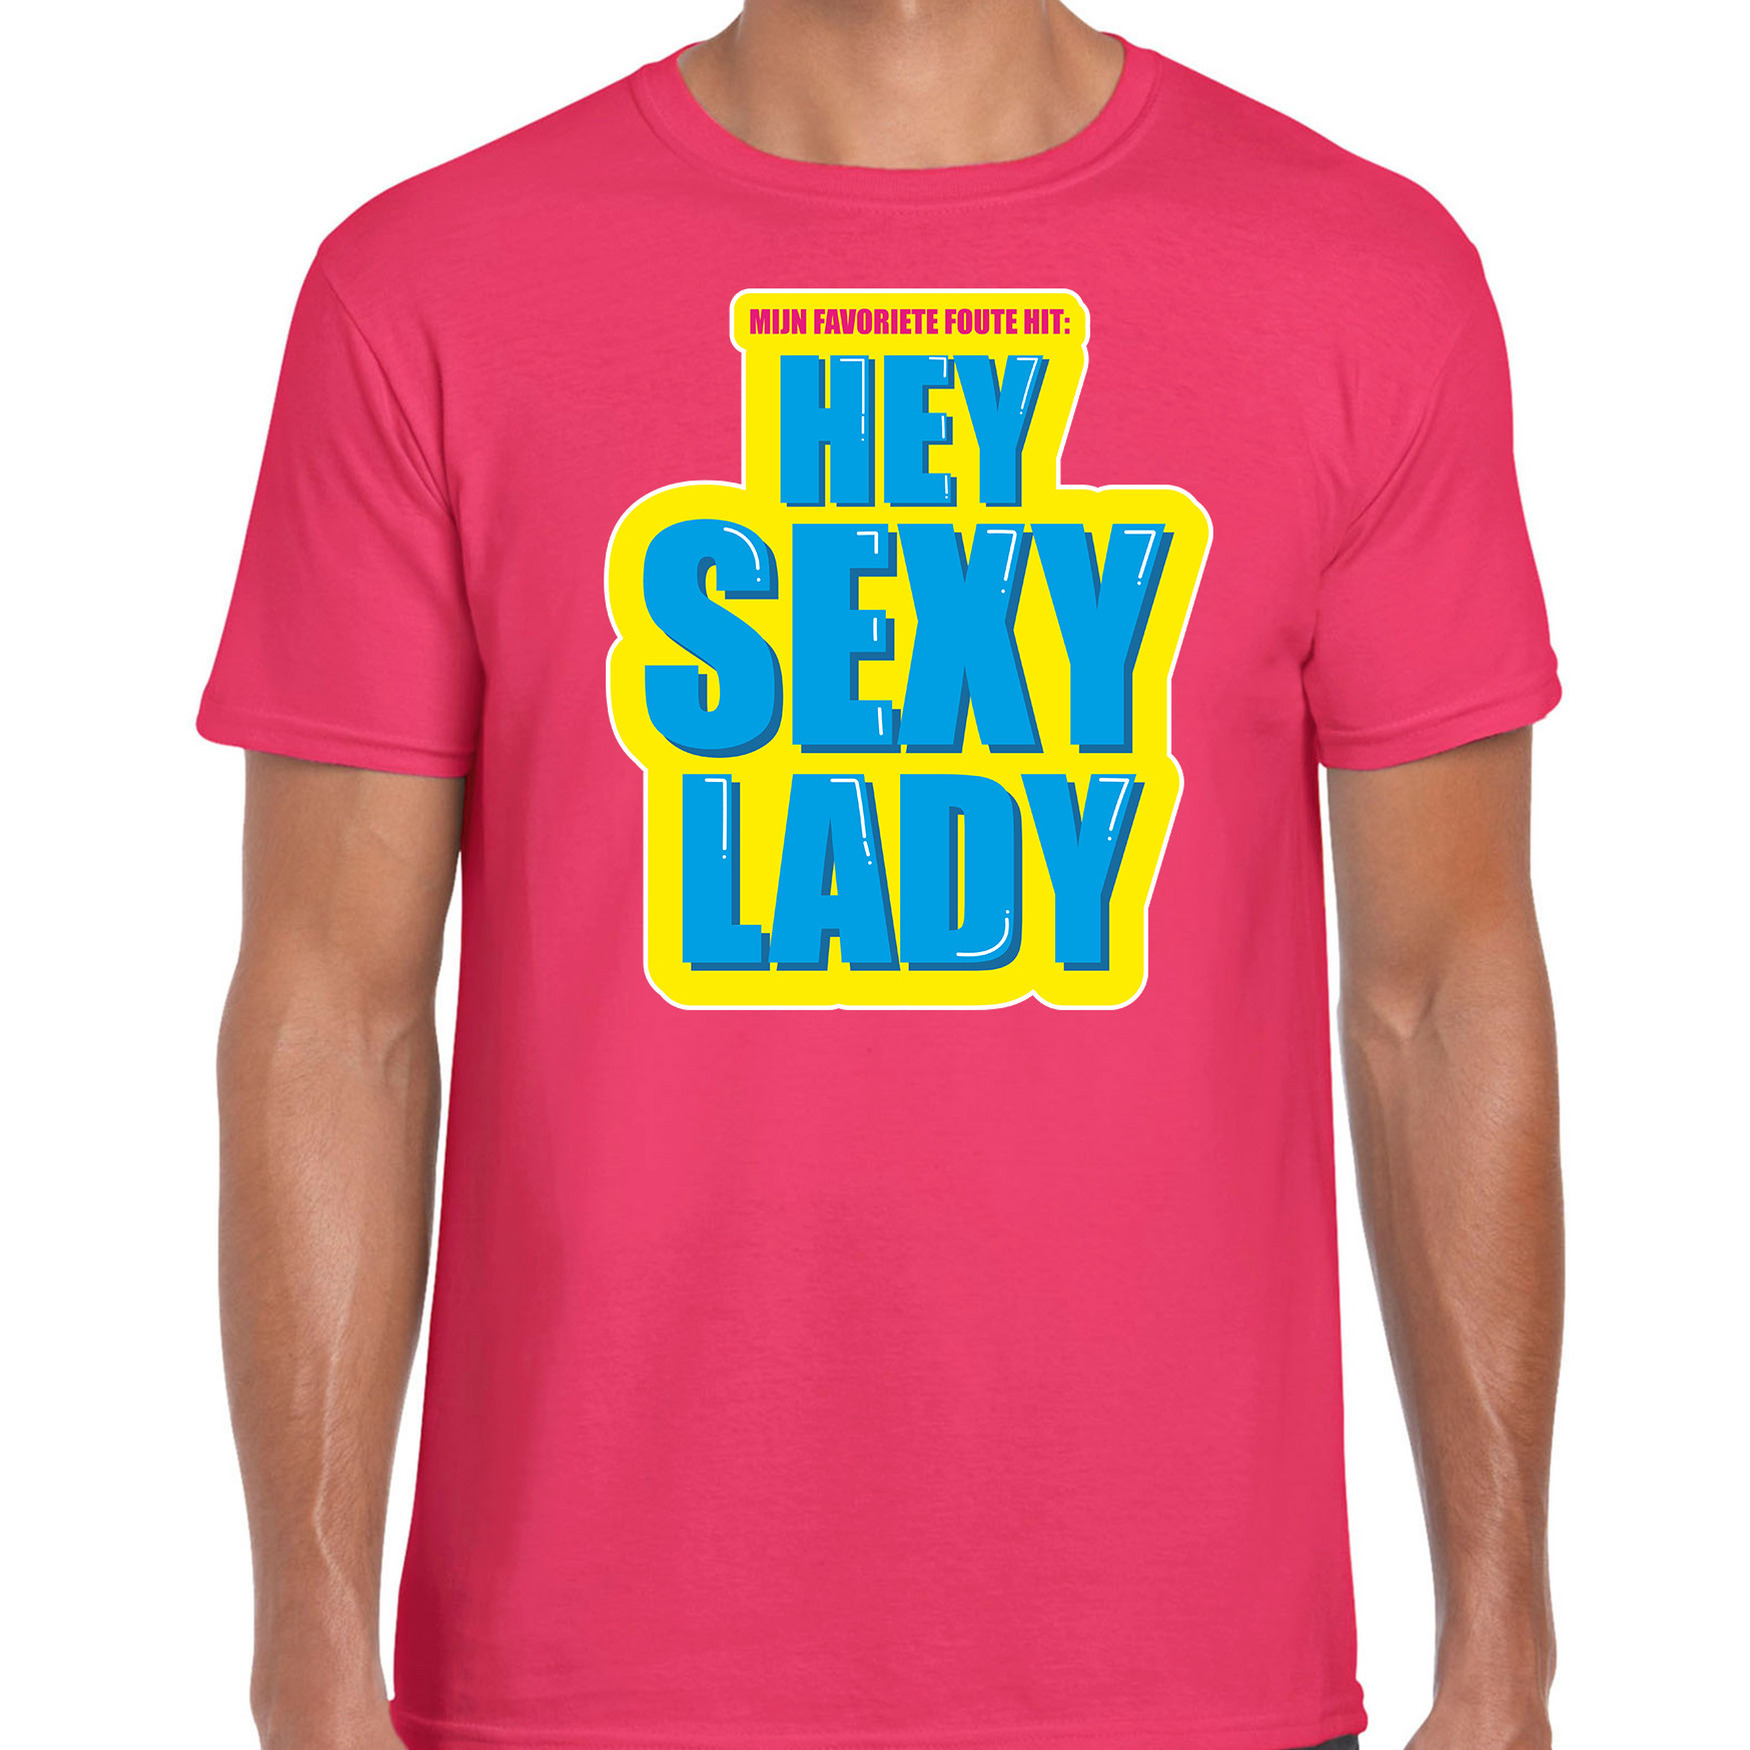 Foute party Hey sexy lady verkleed t-shirt roze heren Foute party hits outfit- kleding